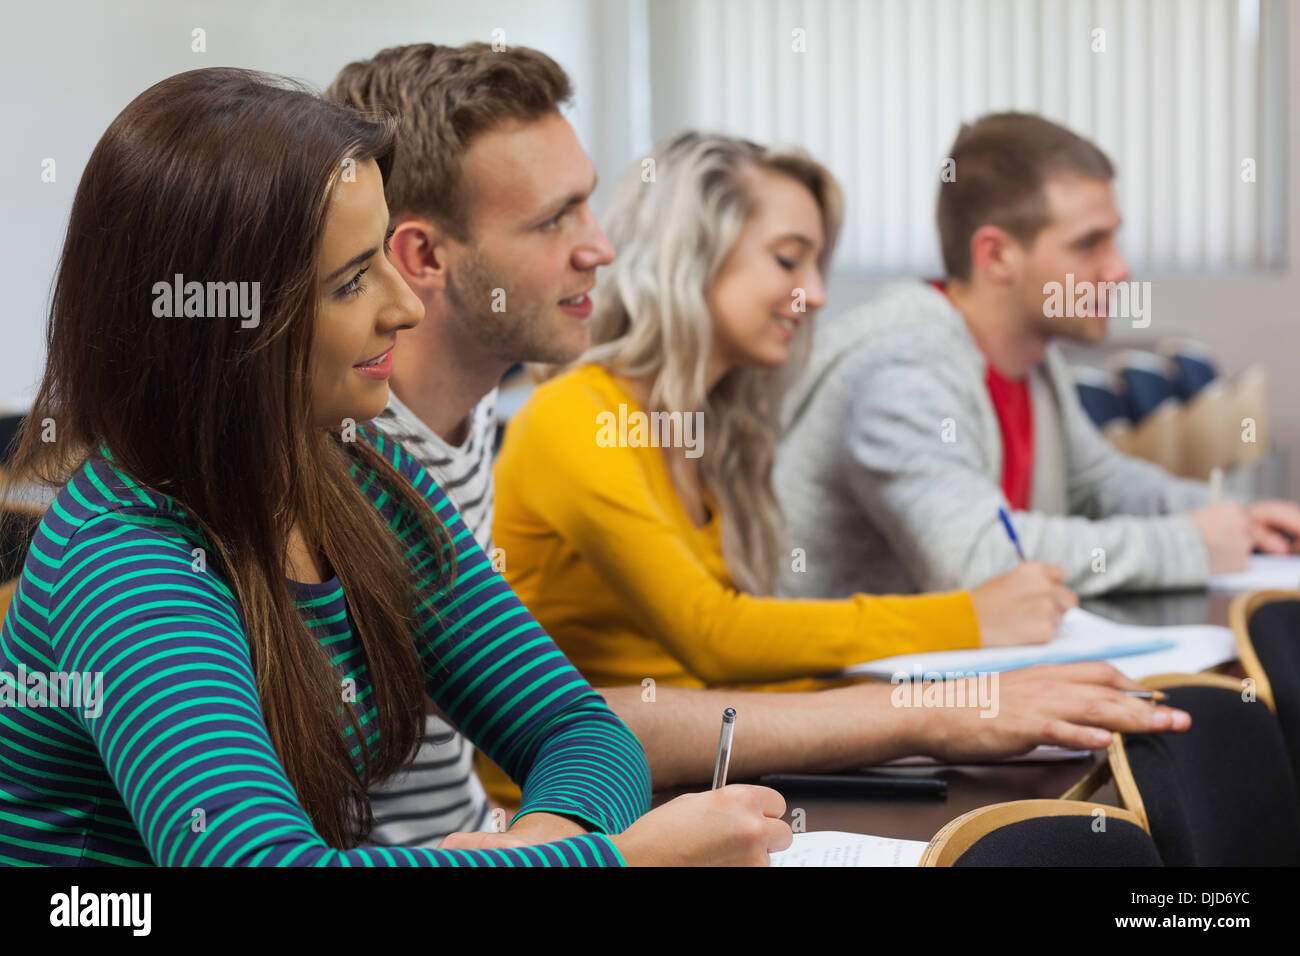 Attentive students taking notes Stock Photo